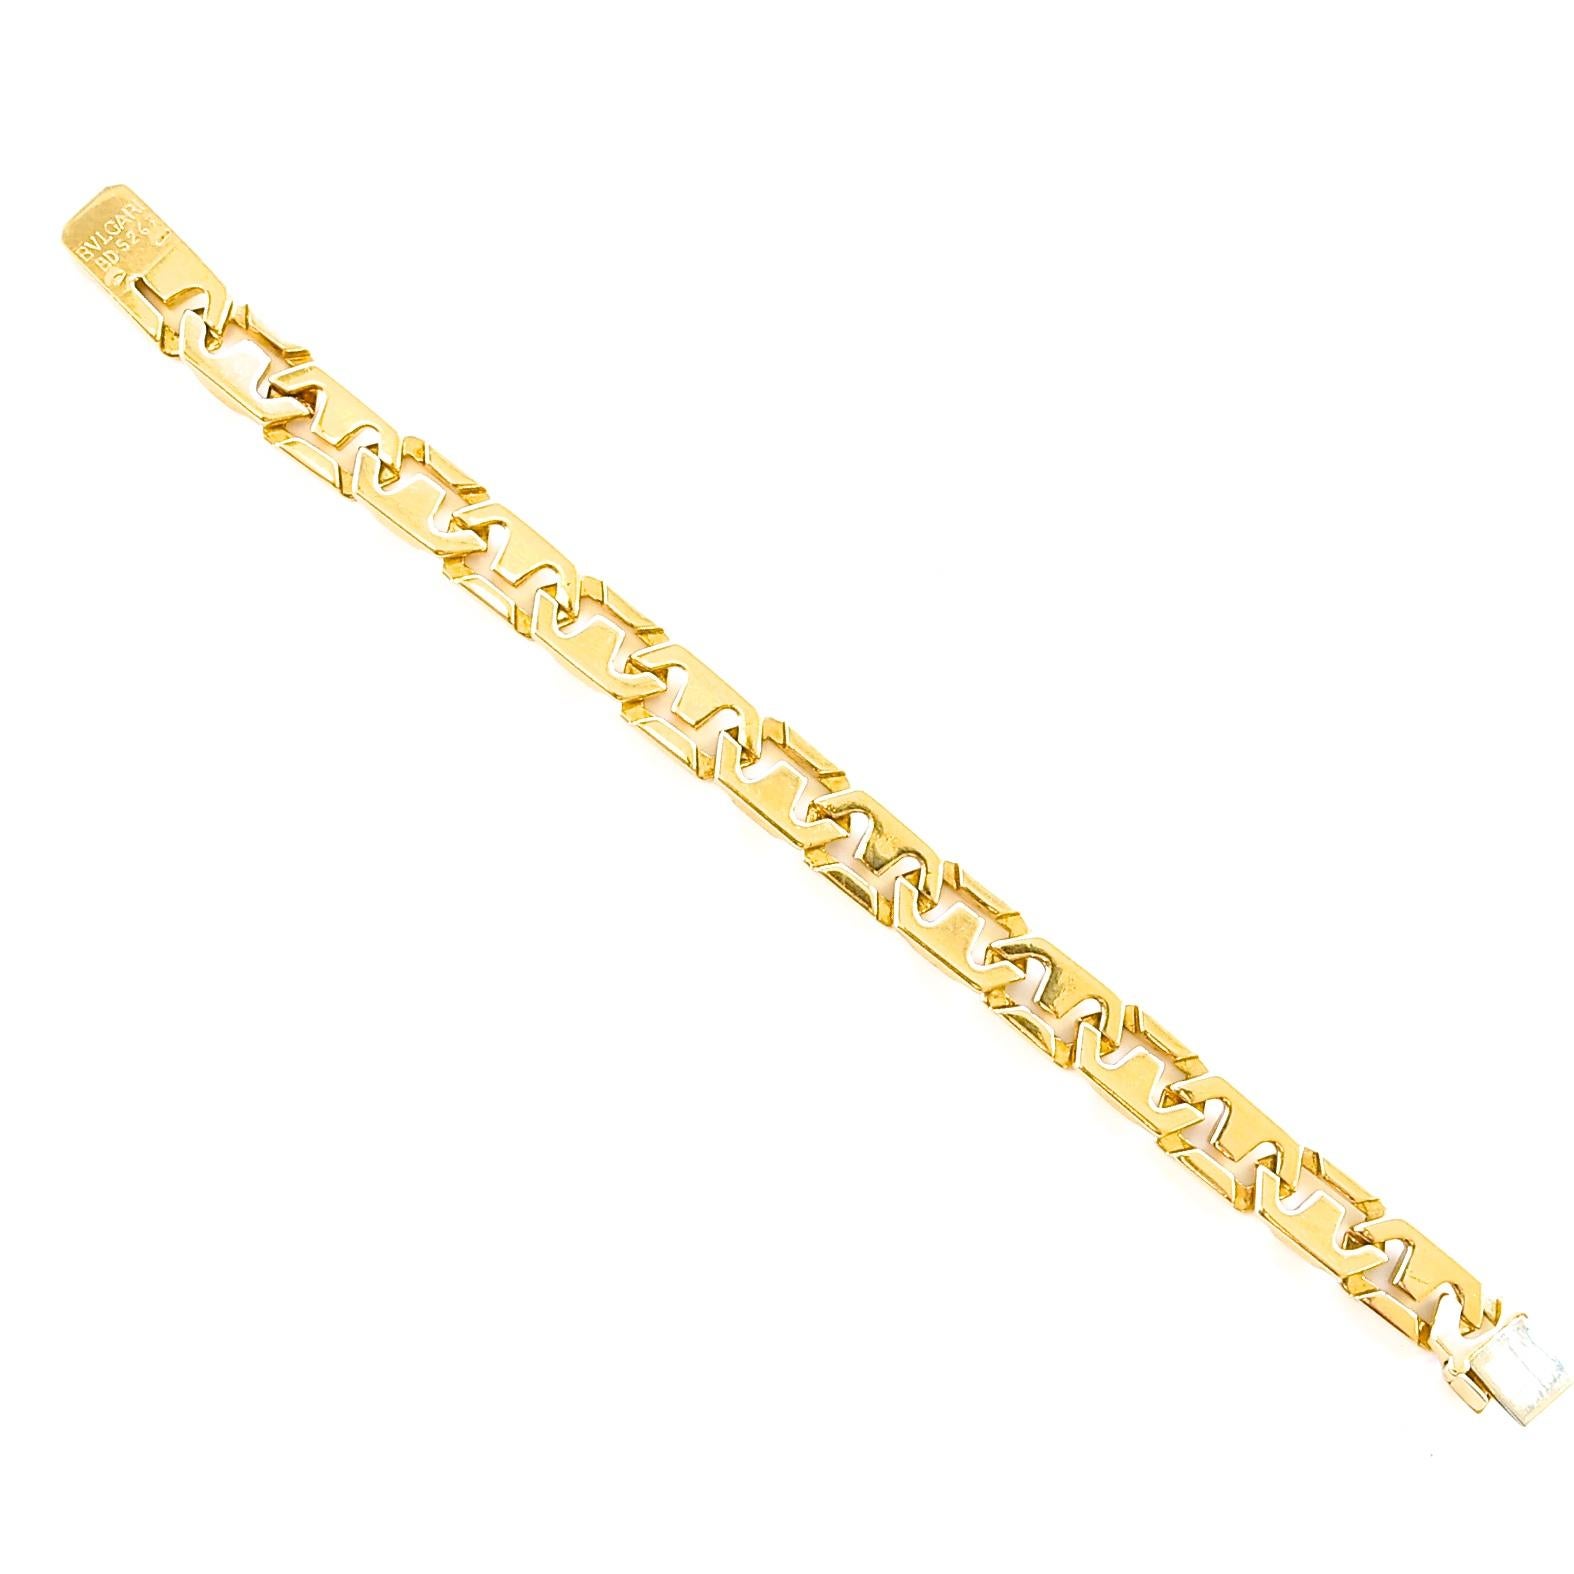 Bulgari's style is mysterious and unconventionally unique which has set them apart from others for centuries. Using deeply rooted Roman influences in all their creations. Featuring glistening 18k gold interlocking link after link. Signed Bvlgari.